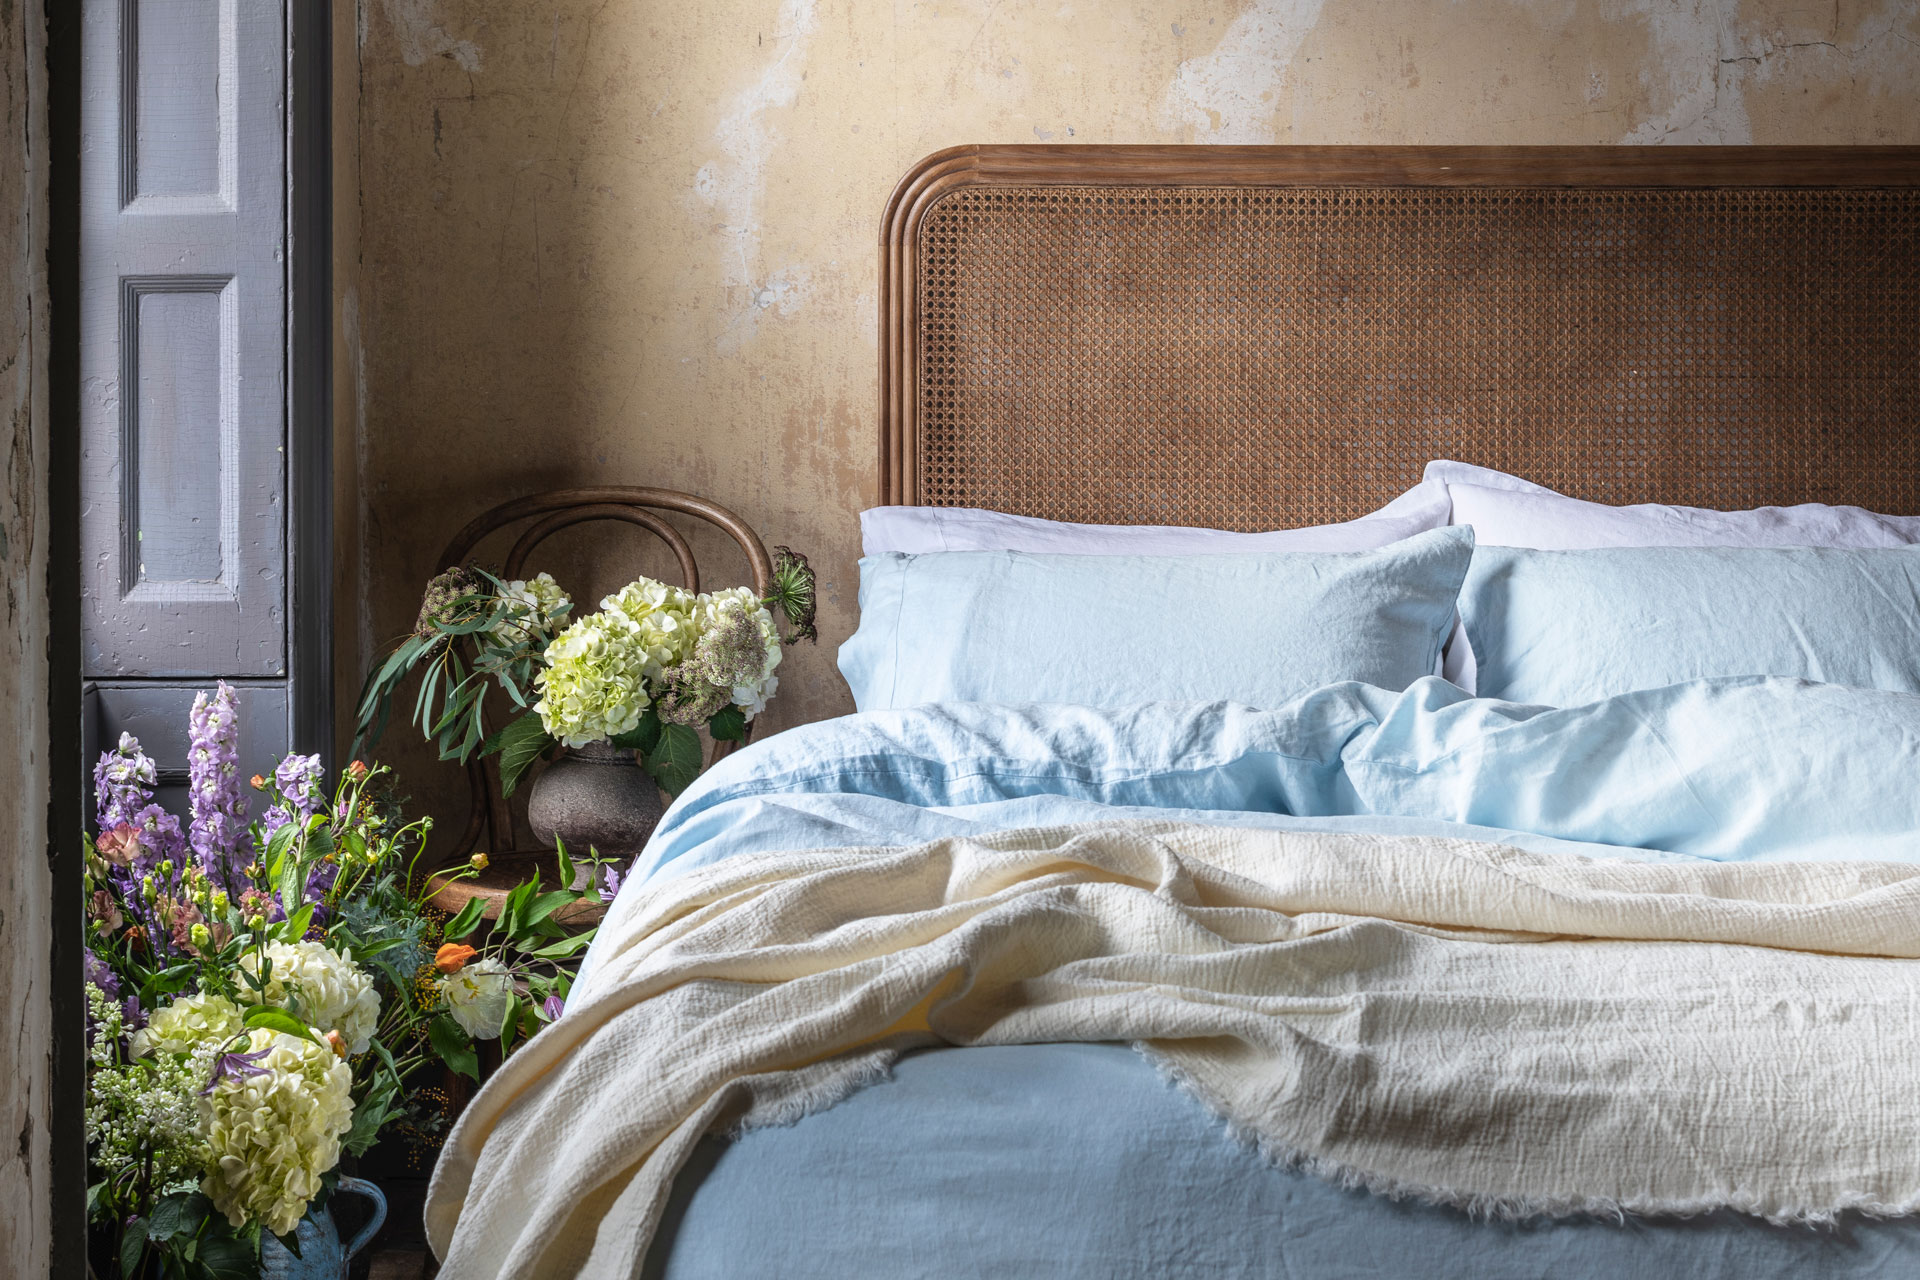 blue linen bedding in a Parisian bedroom, by Piglet in Bed